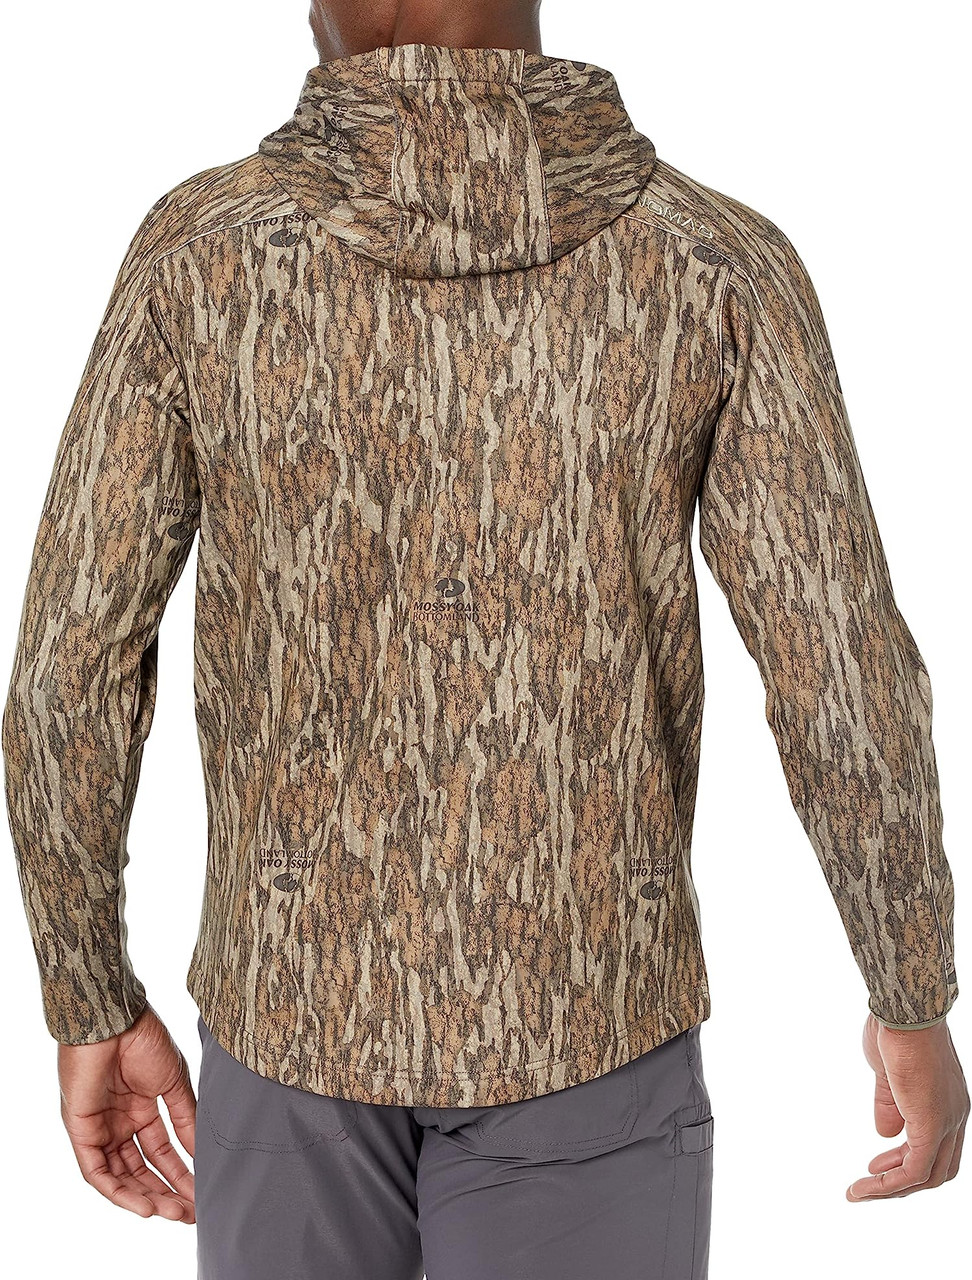 Nomad WPF Hoodie Mid-Weight Water Resistant Hunting Fleece -Bottomaland - M